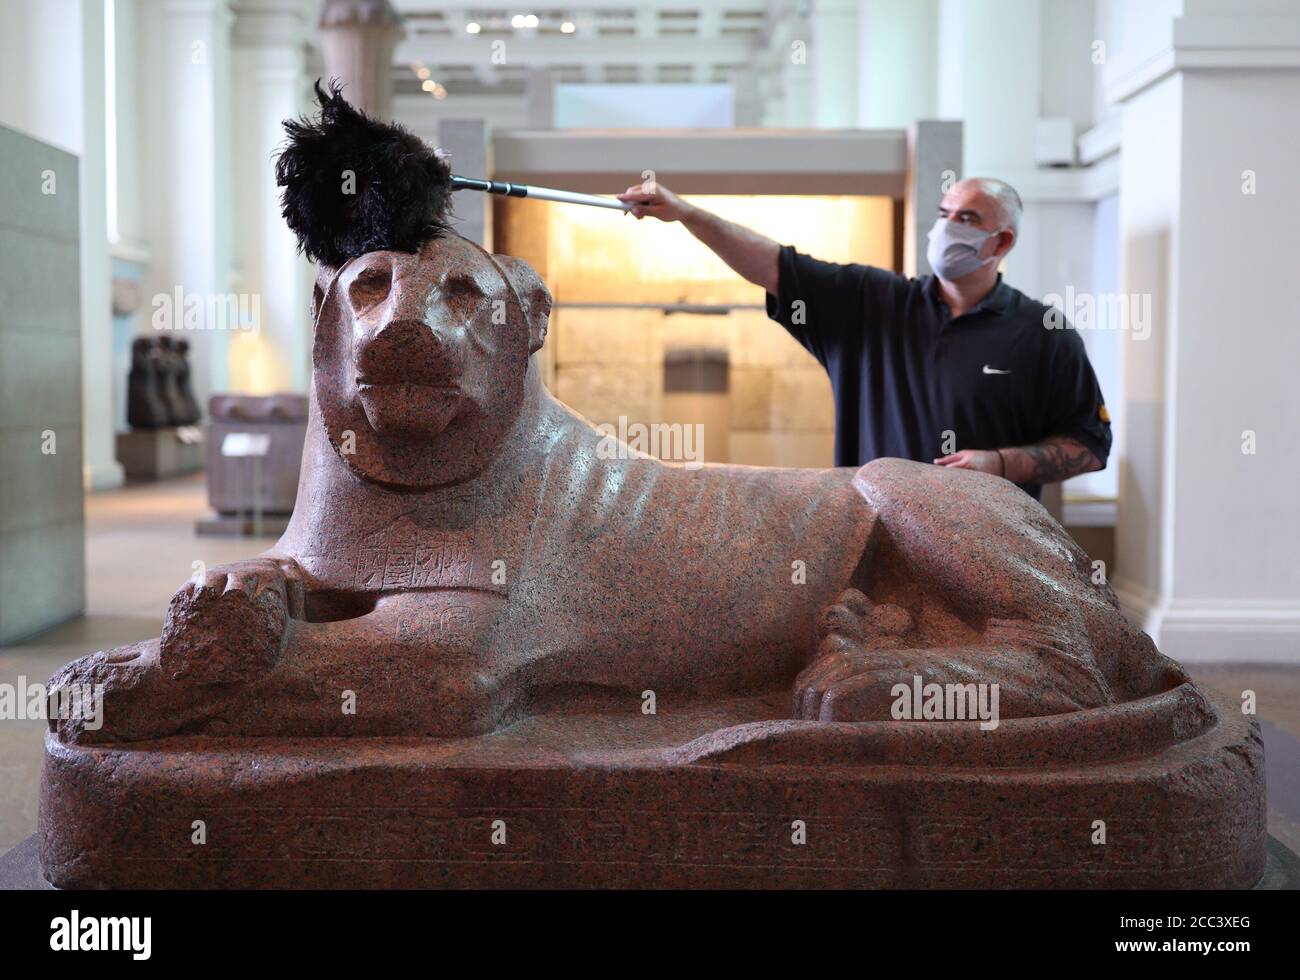 Collection manager Evan York dusting a statue of King Amenhotep III as a lion (about 1390-1352 BC), in the Egyptian Sculpture Gallery at the British Museum, London, as they prepare to re-open to the public on August 27 following the coronavirus lockdown. Ahead of reopening, the British Museum has embarked on the biggest single programme of cleaning in decades. Stock Photo